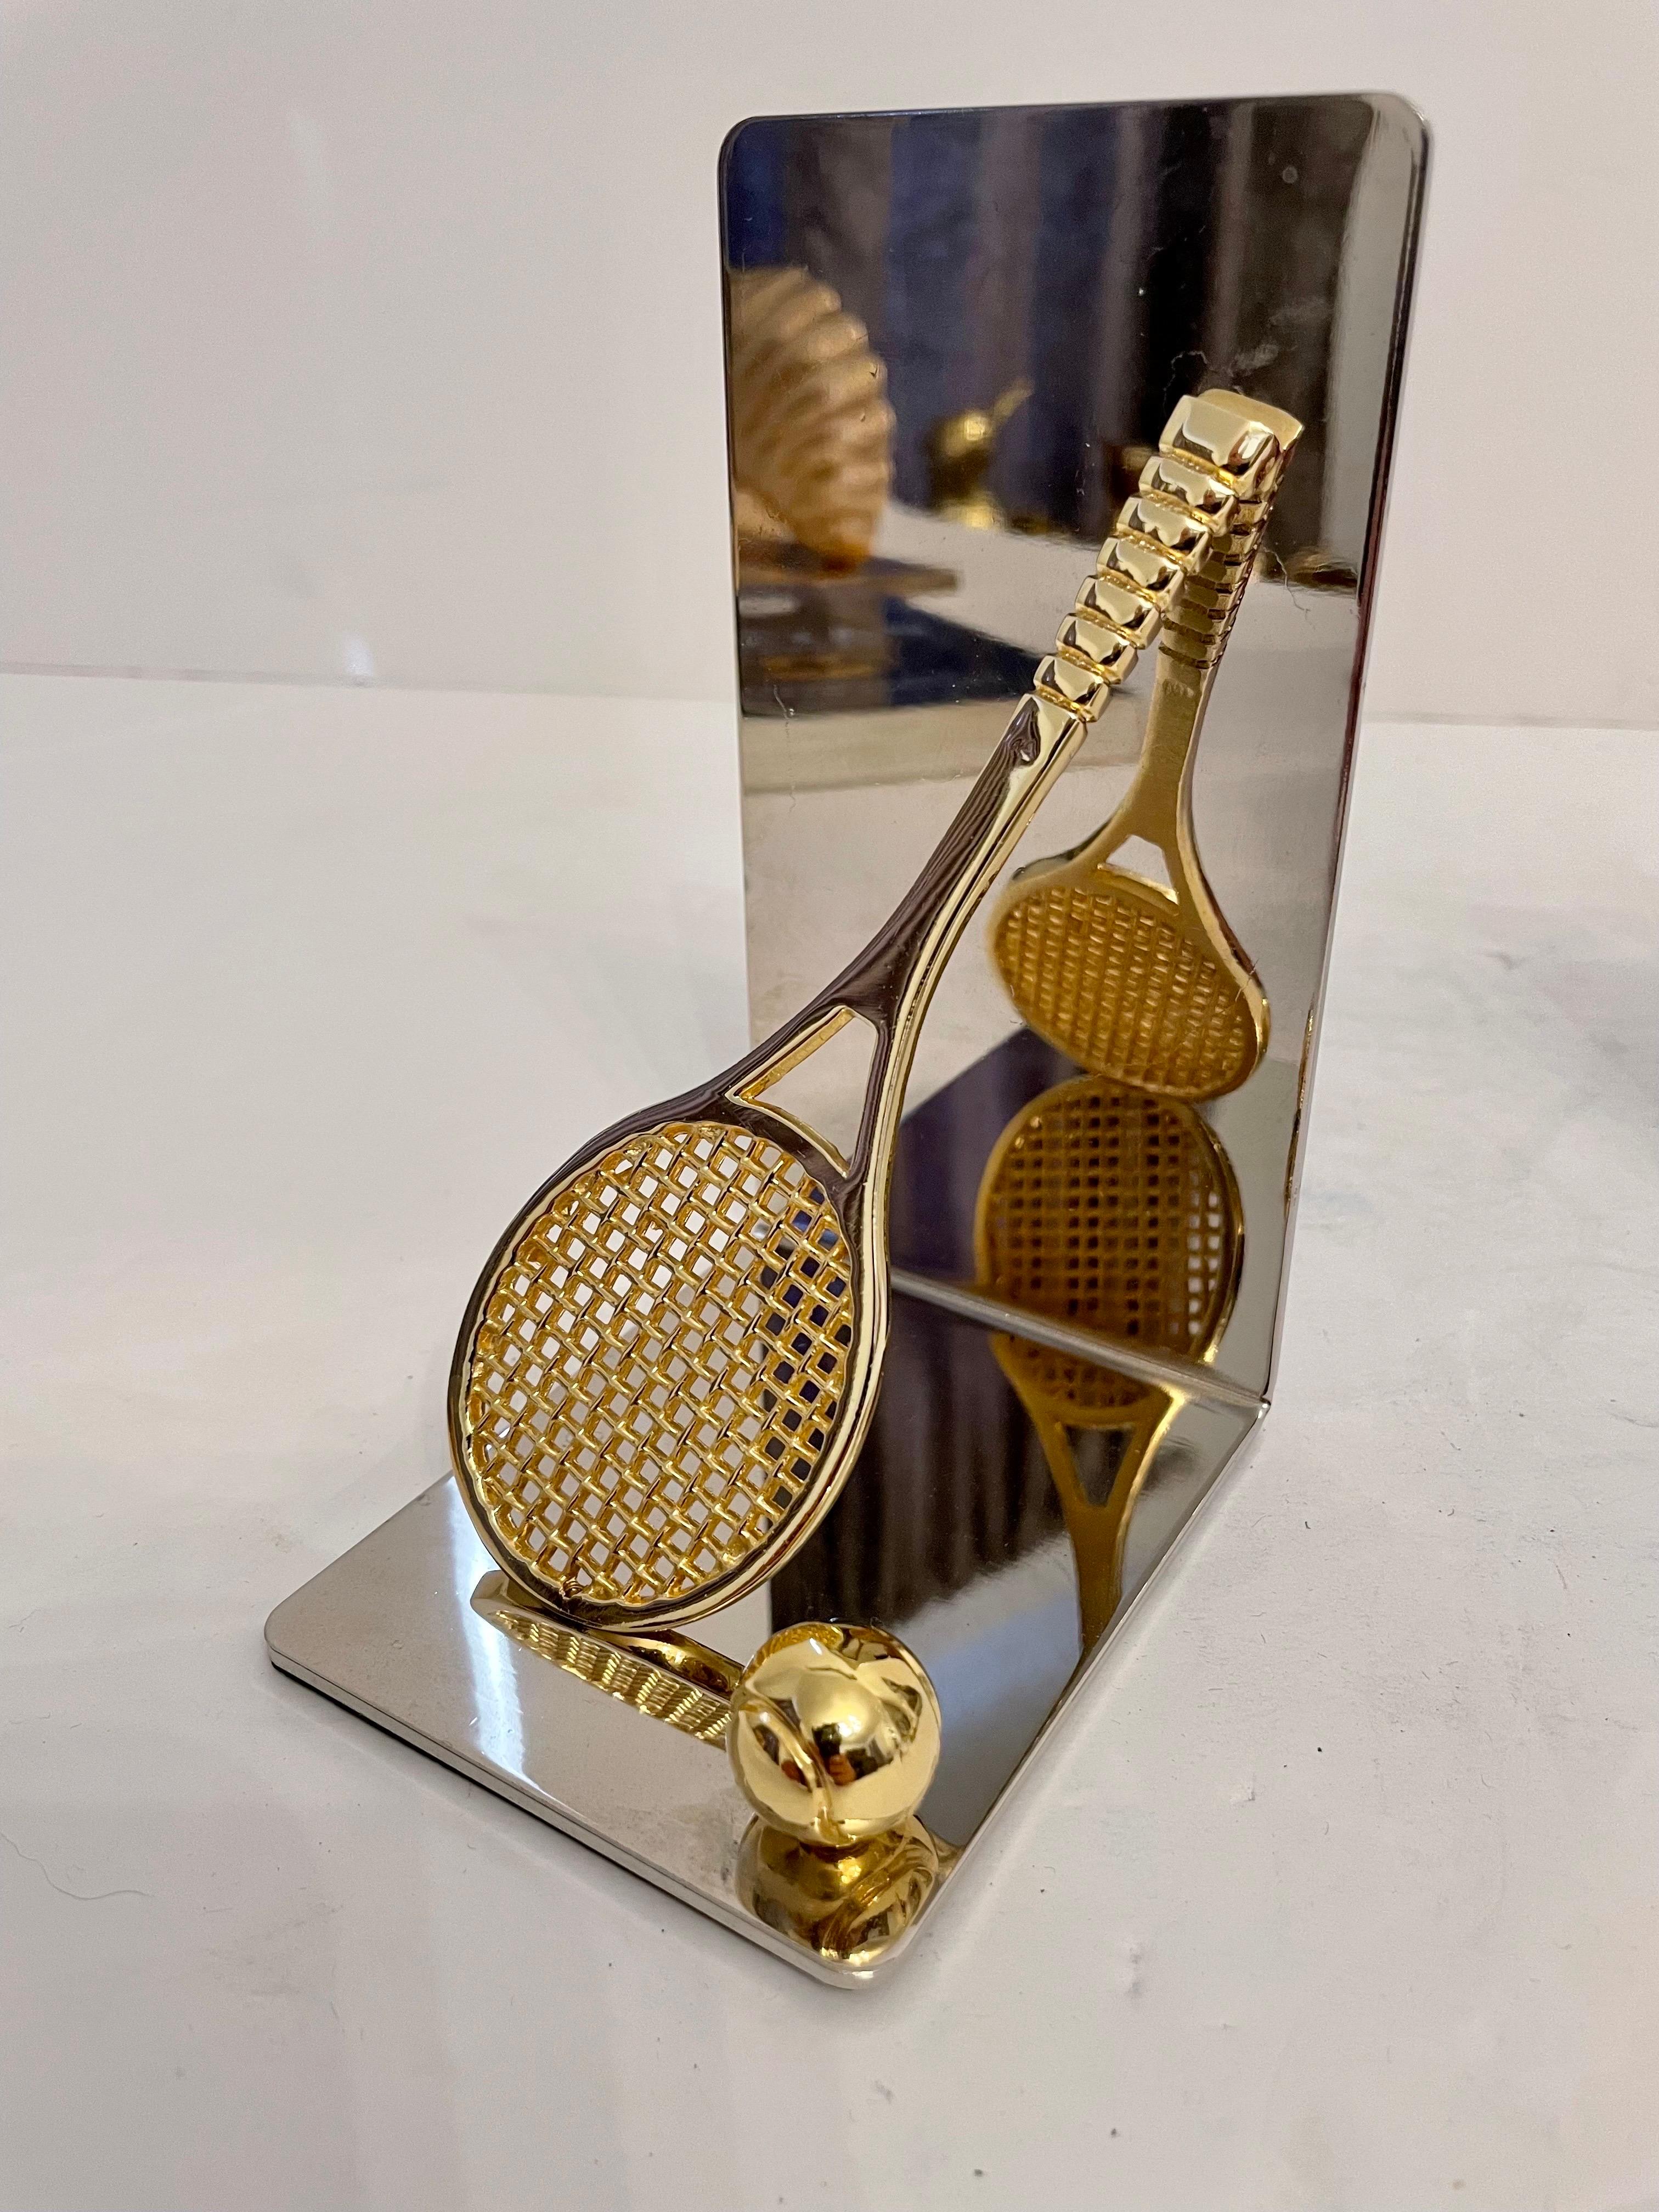 Set of brass and chrome tennis racket bookends. Features a brass tennis racket and ball on each. Has thin foam on bottom of each to prevent scratching furniture. 5.5